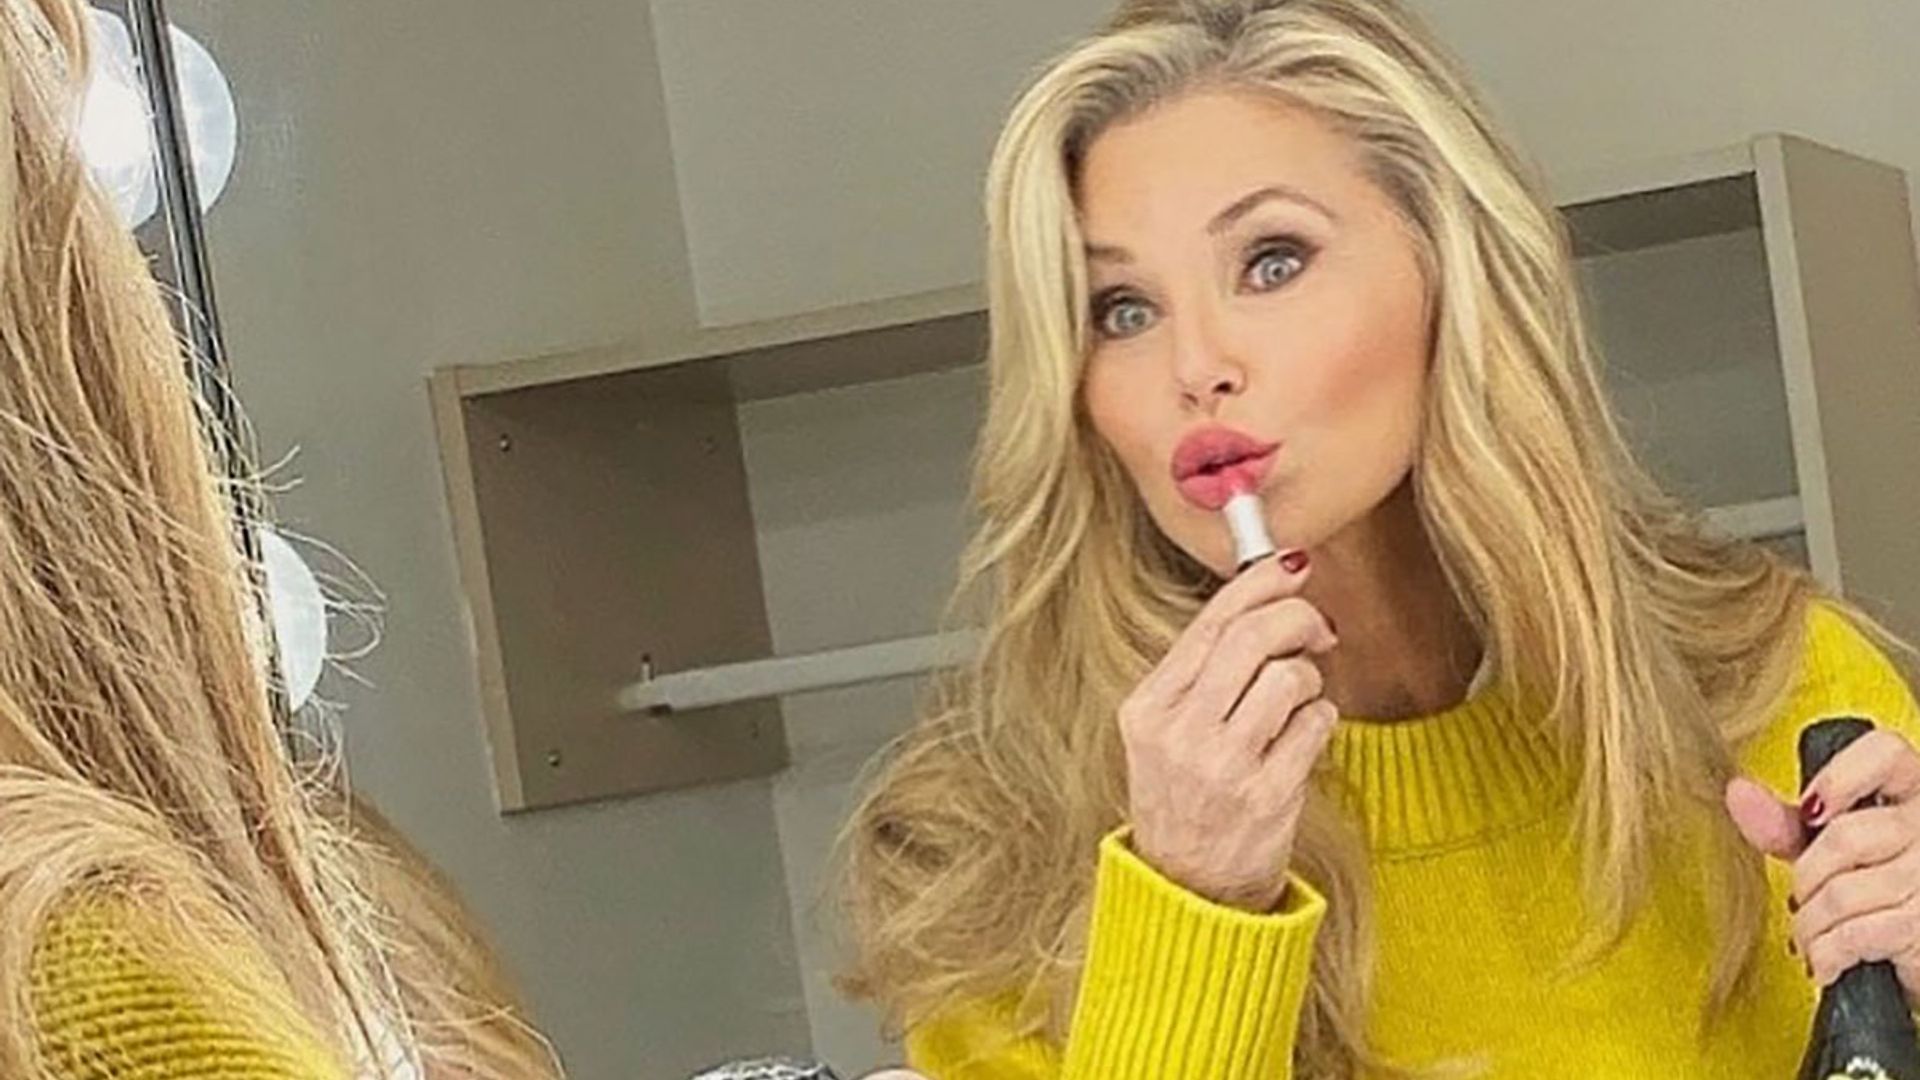 Christie Brinkley dances in figure-hugging mini green dress – and fans make cheeky comment!